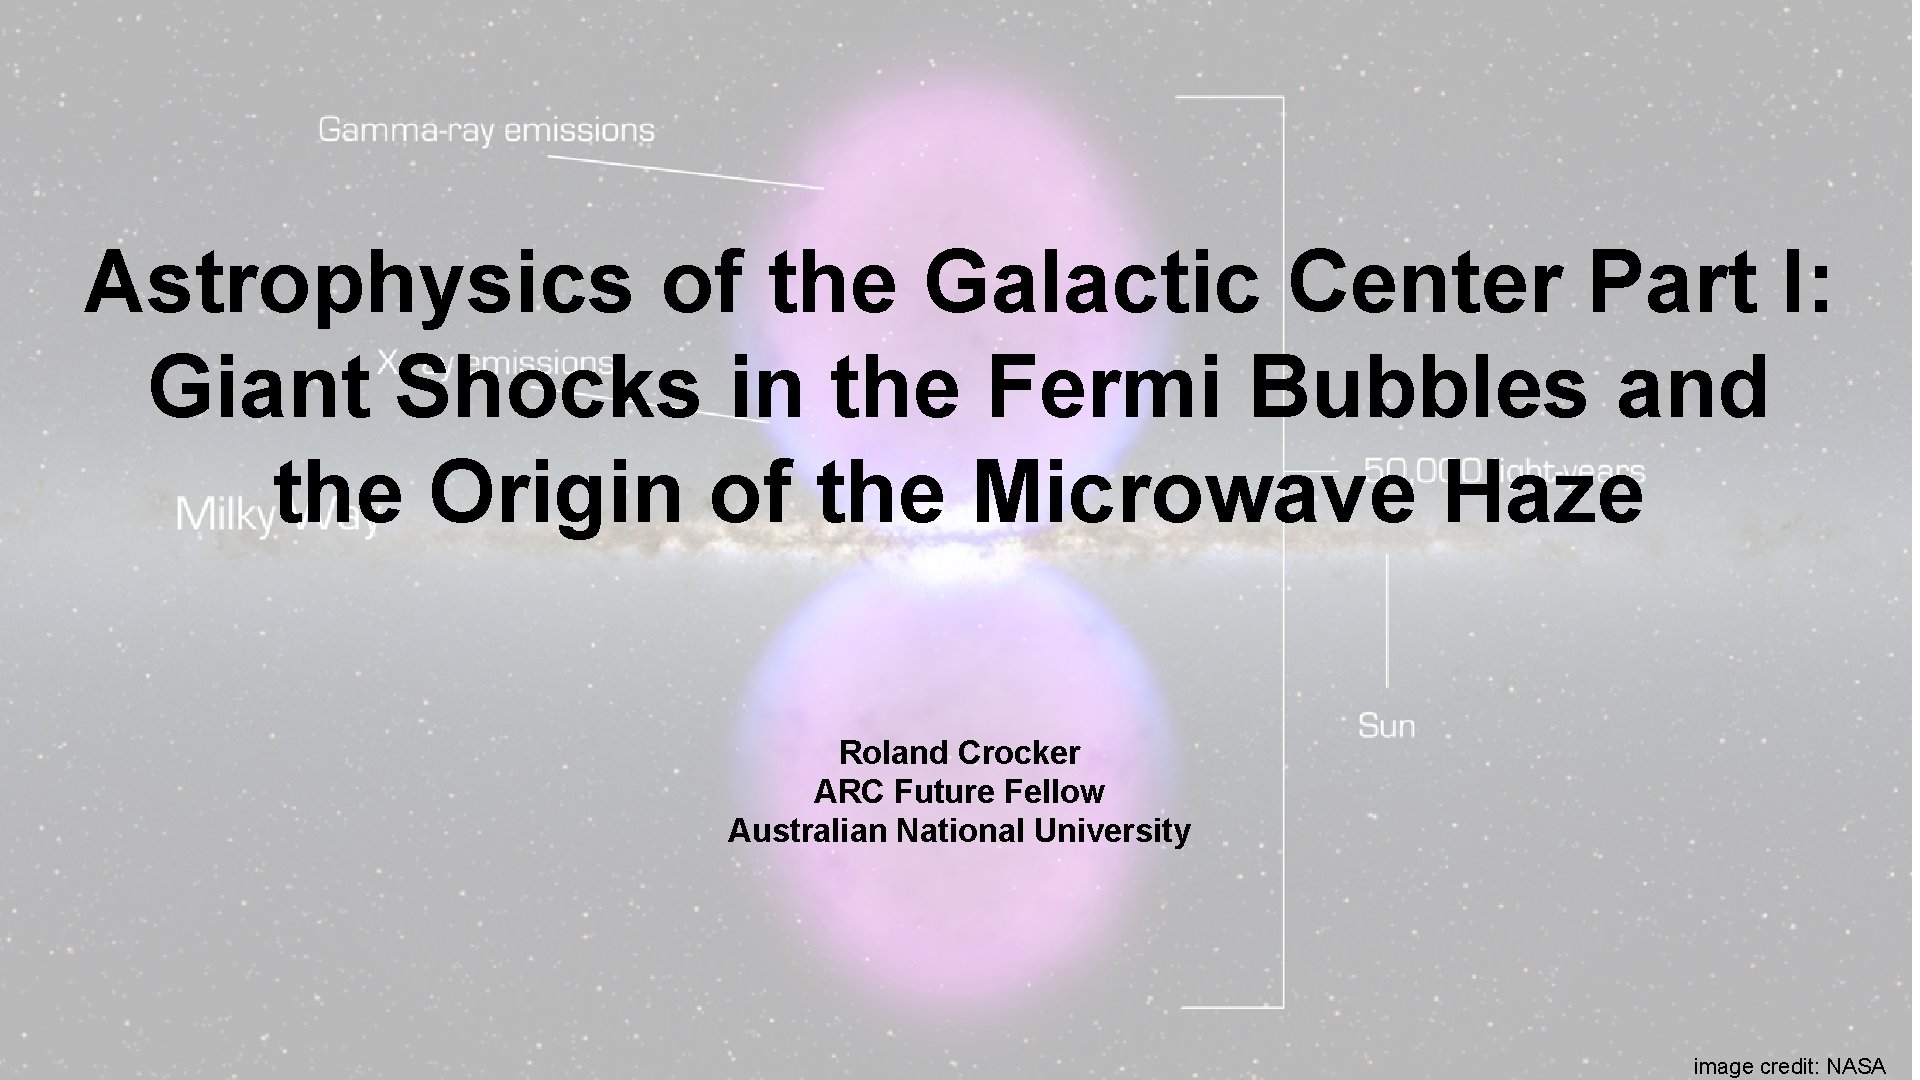 Astrophysics of the Galactic Center Part I: Giant Shocks in the Fermi Bubbles and